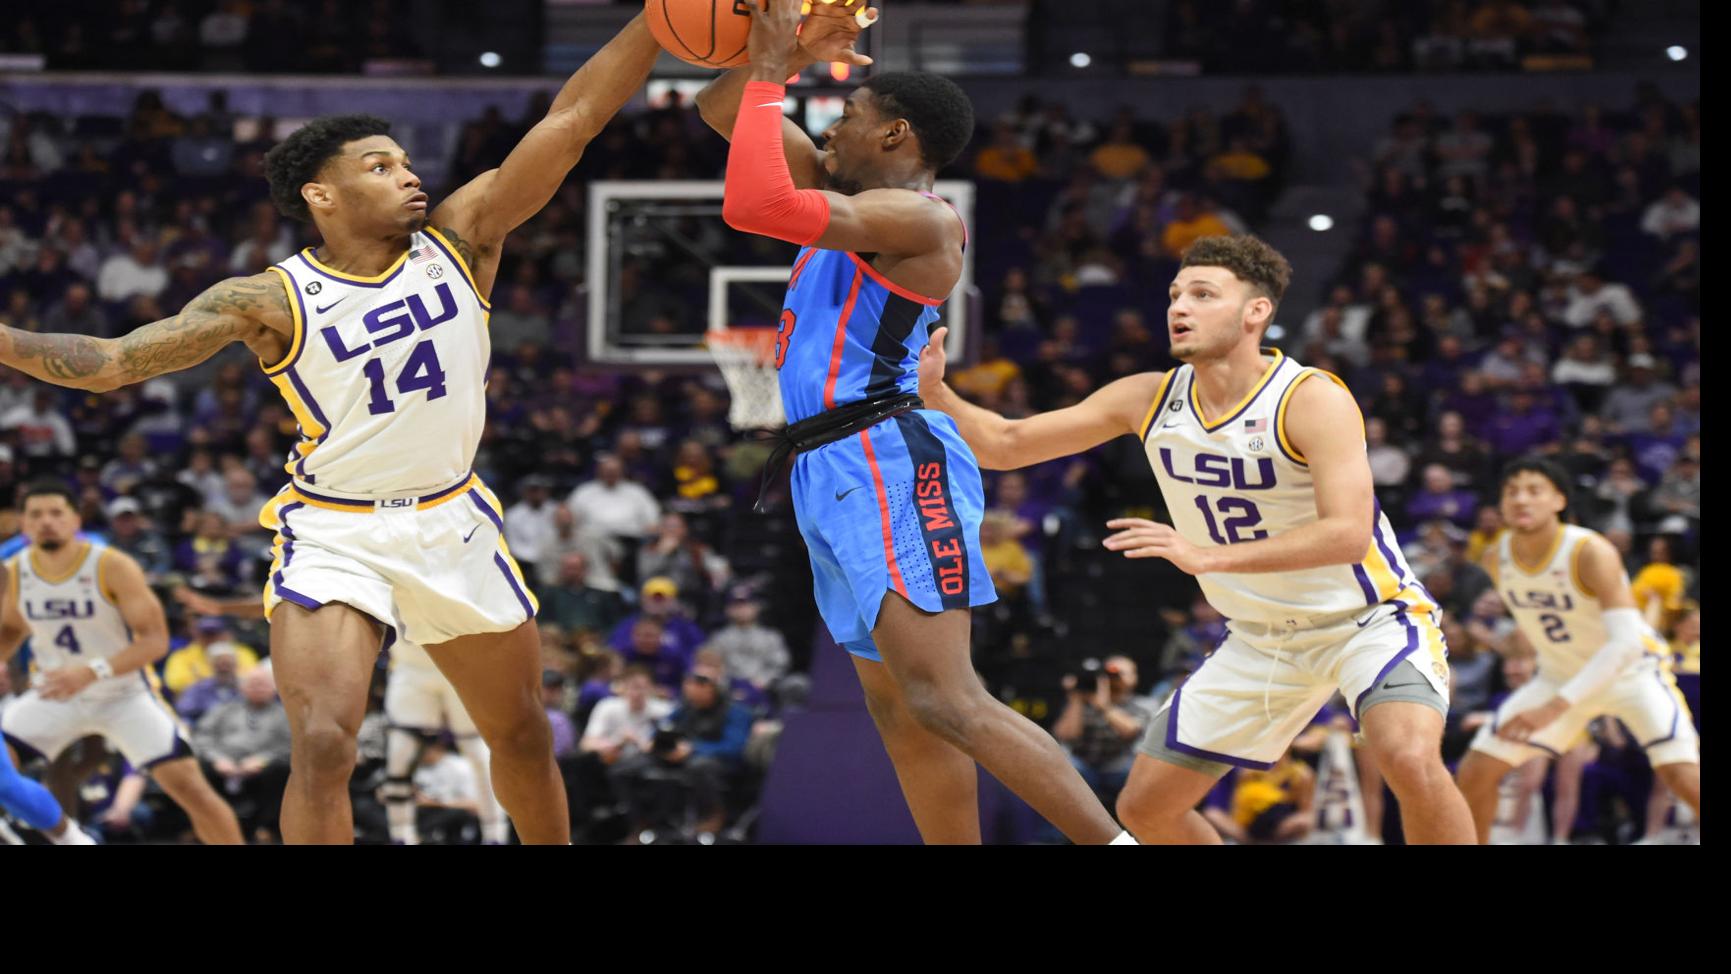 Photos: LSU defeats Ole Miss 73-63, 50th anniversary of Pete Maravich's NCAA hoops career scoring record marked at PMAC